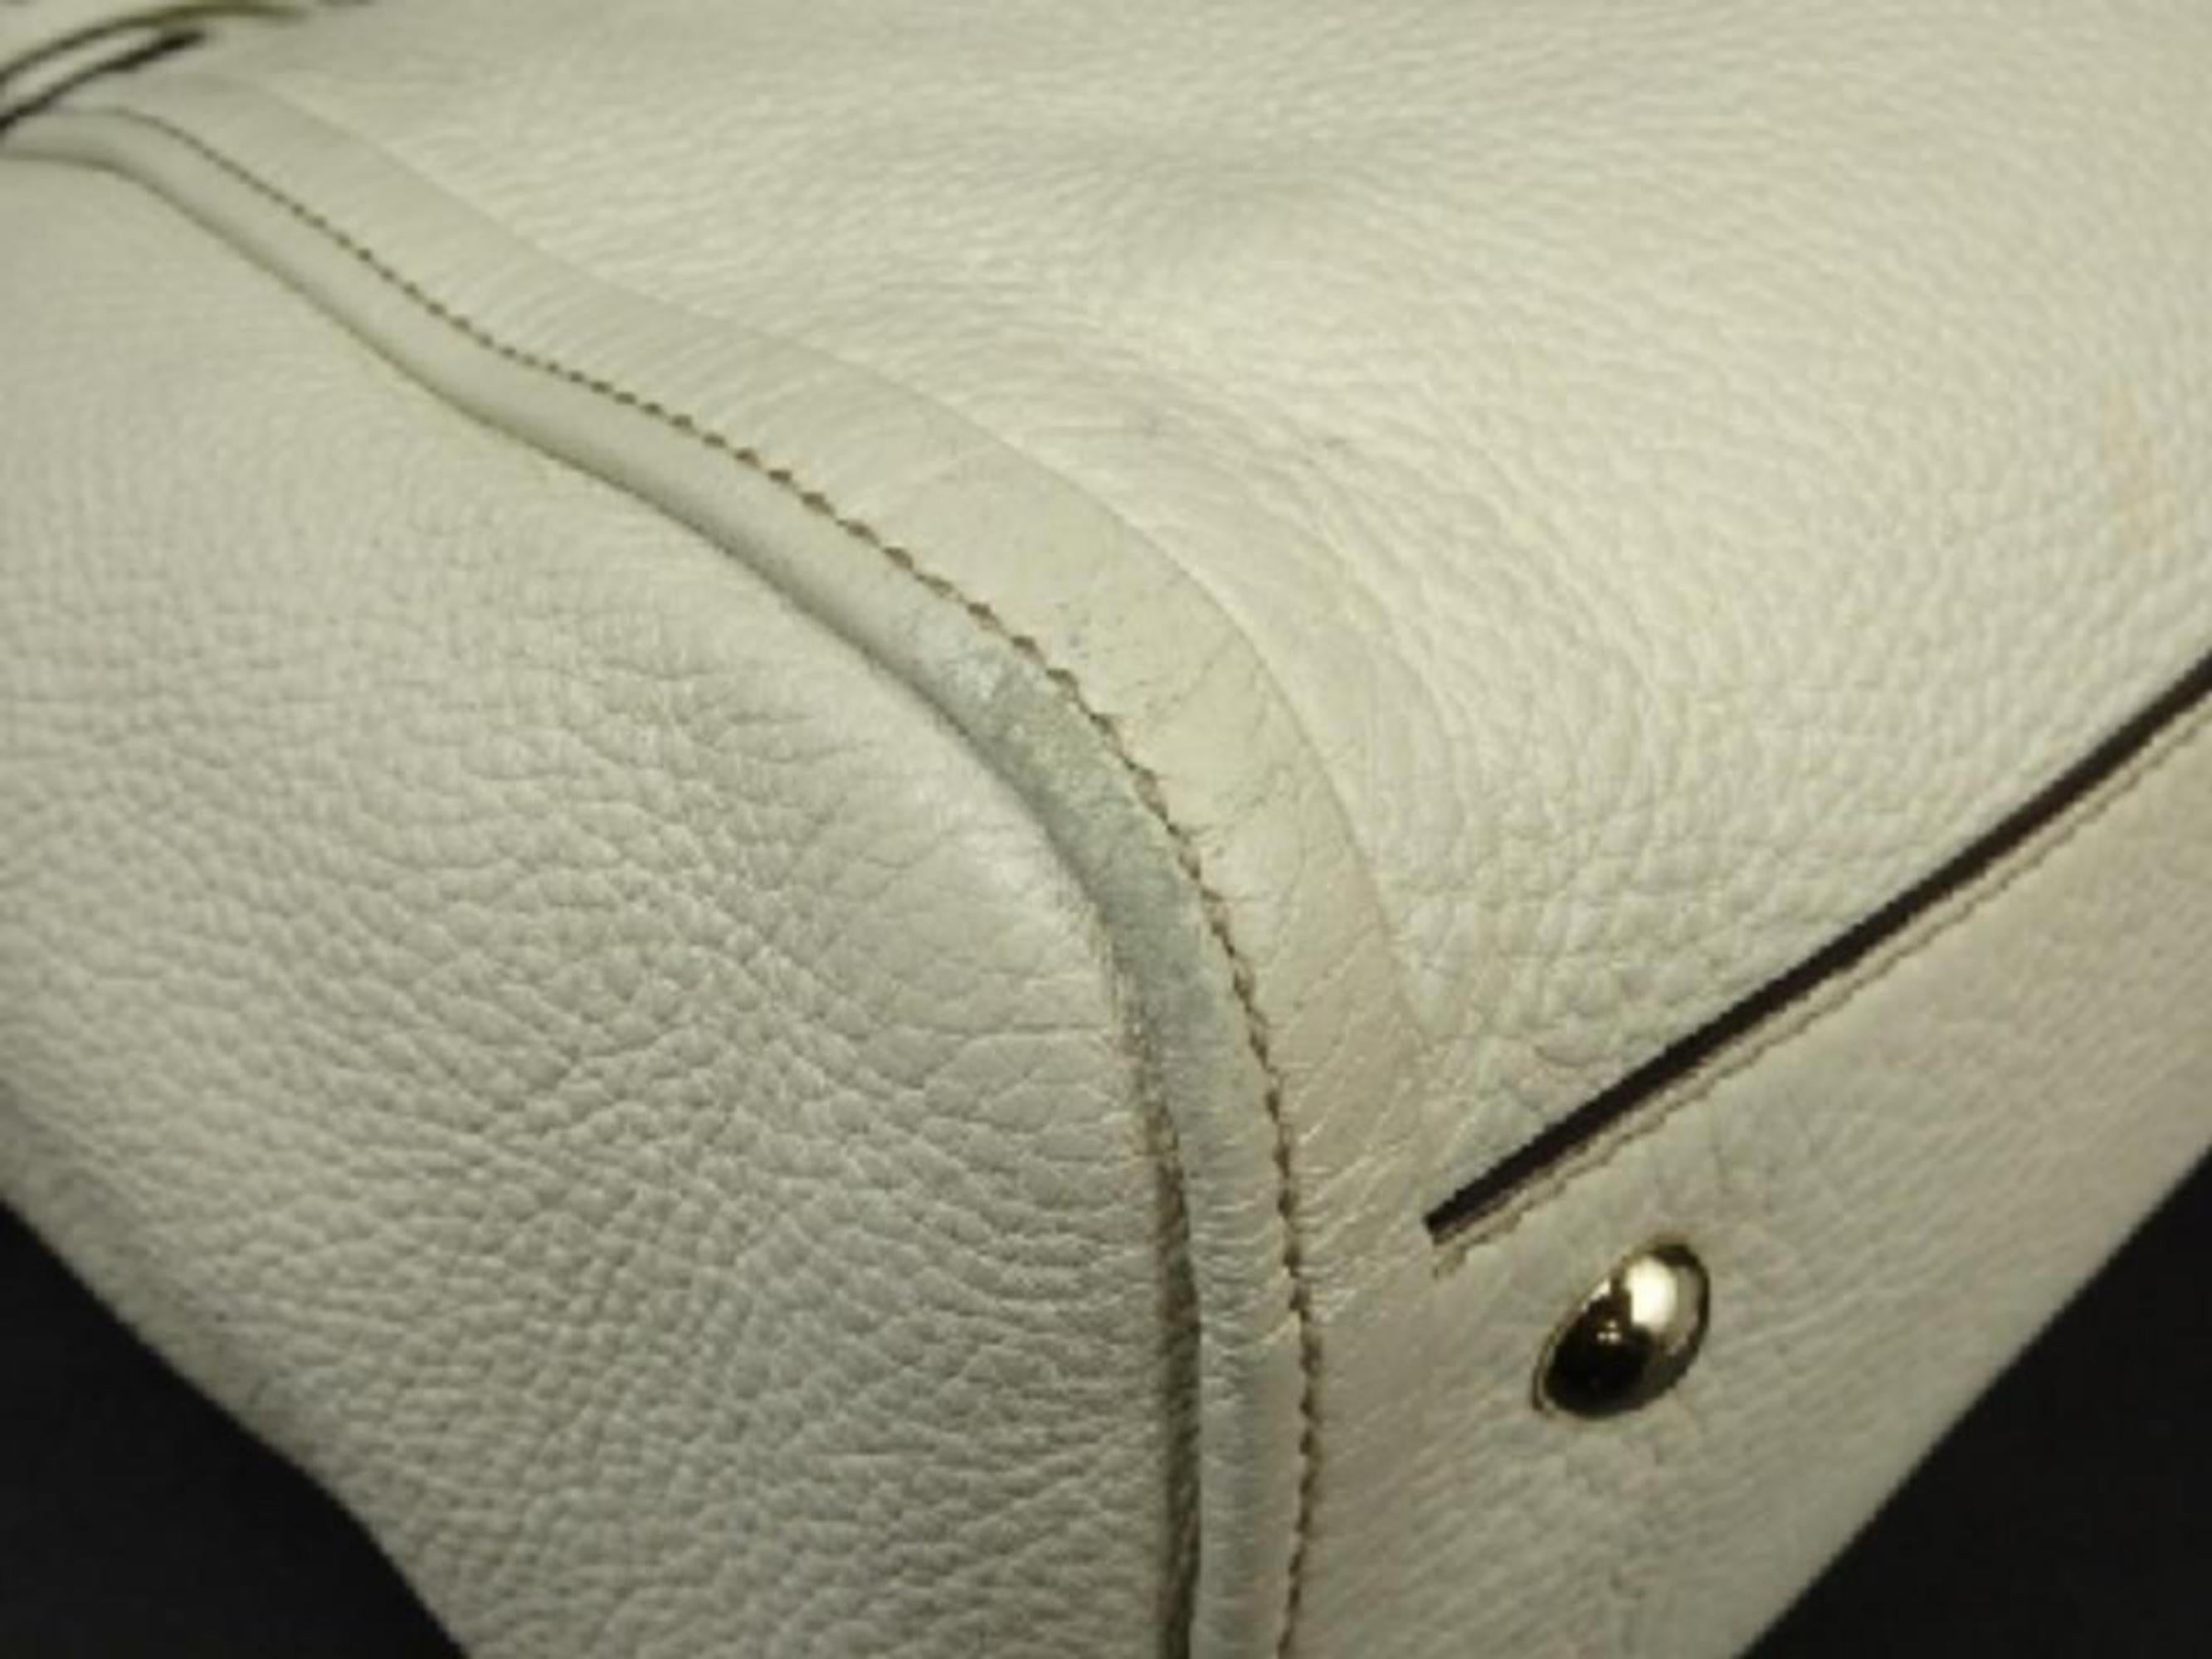 Gucci Soho Convertible 219069 Ivory Leather Shoulder Bag For Sale 4